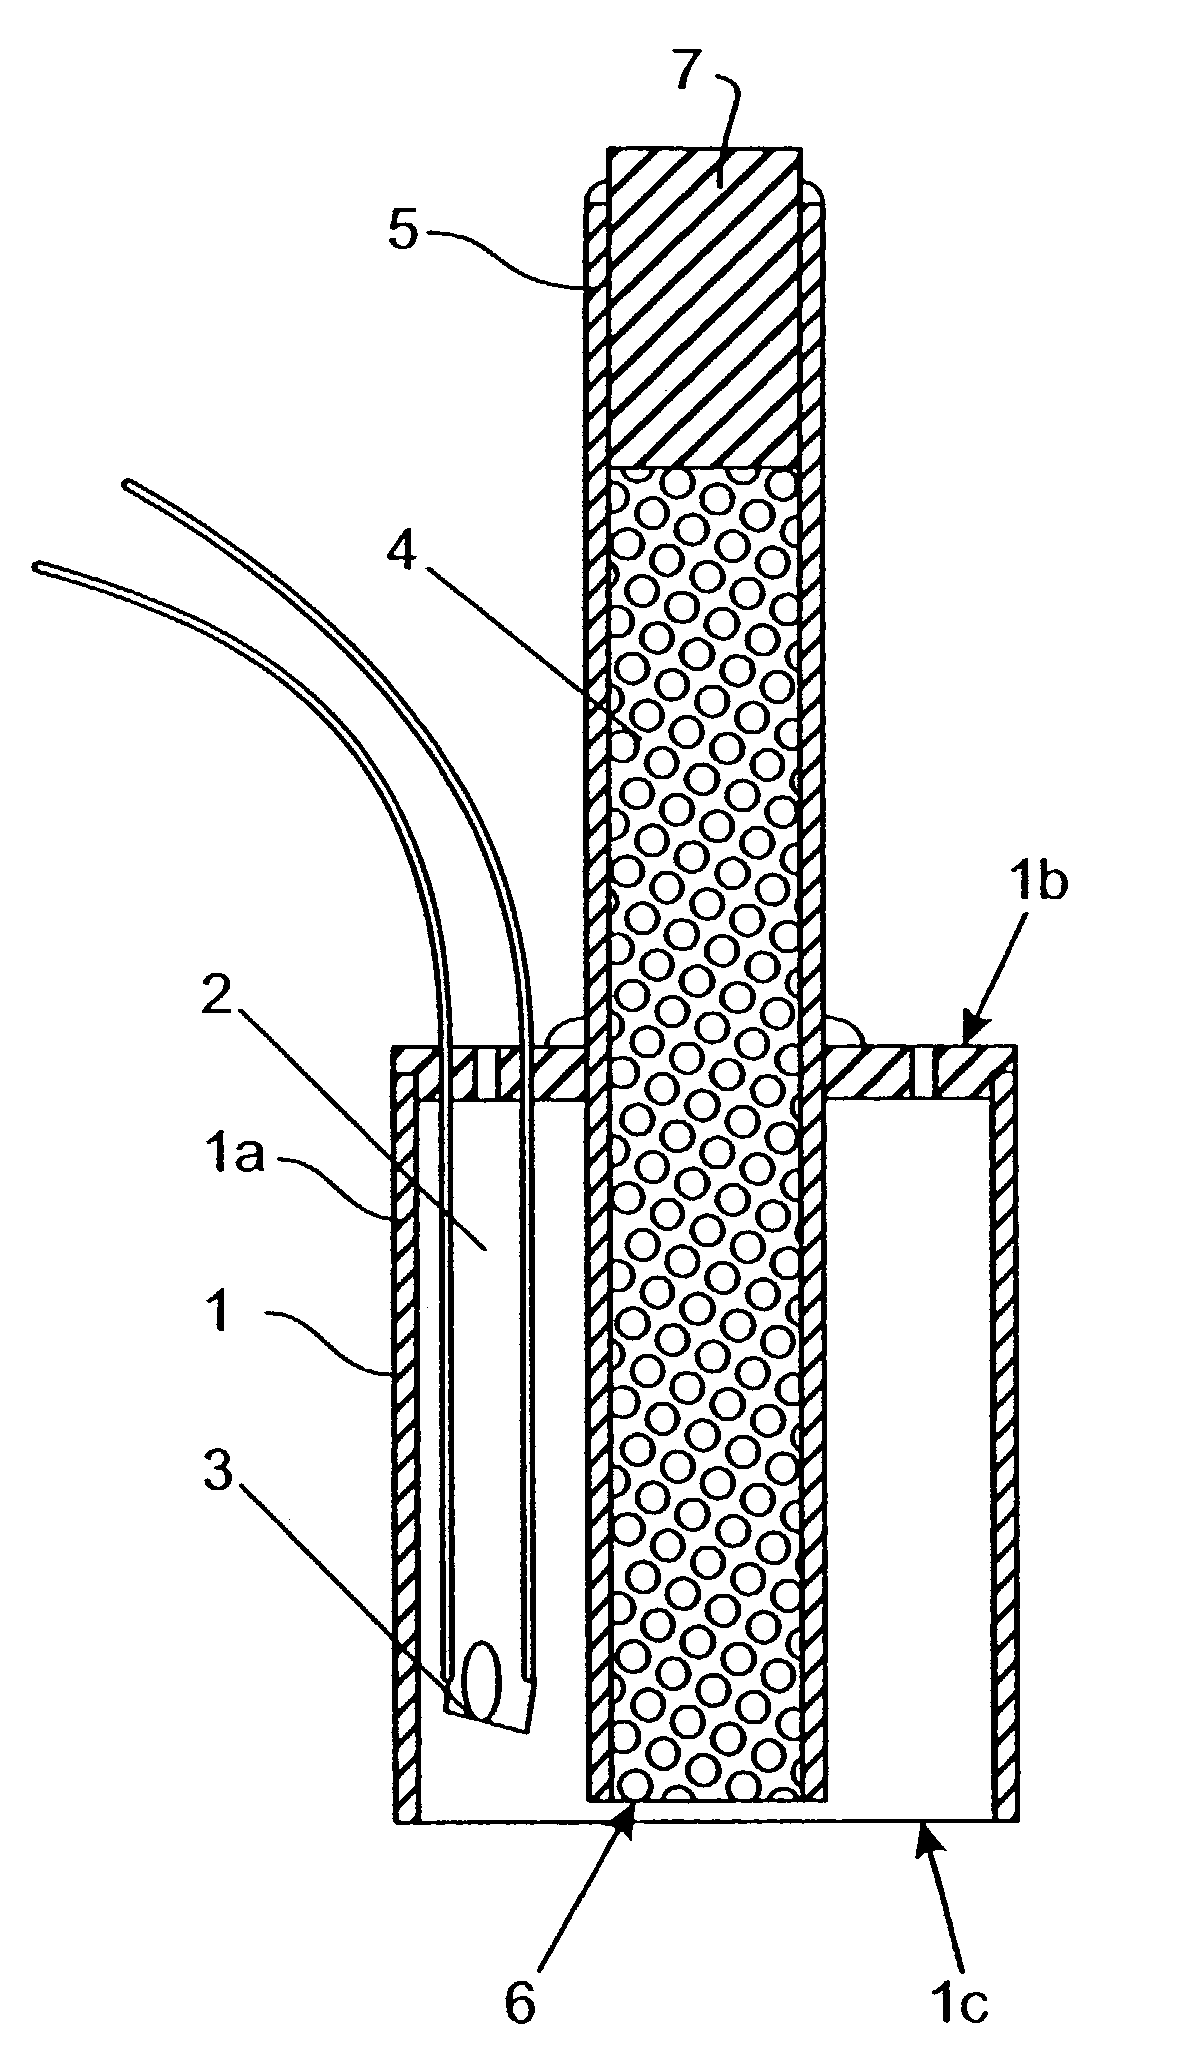 Method and apparatus for mine and unexploded ordnance neutralization